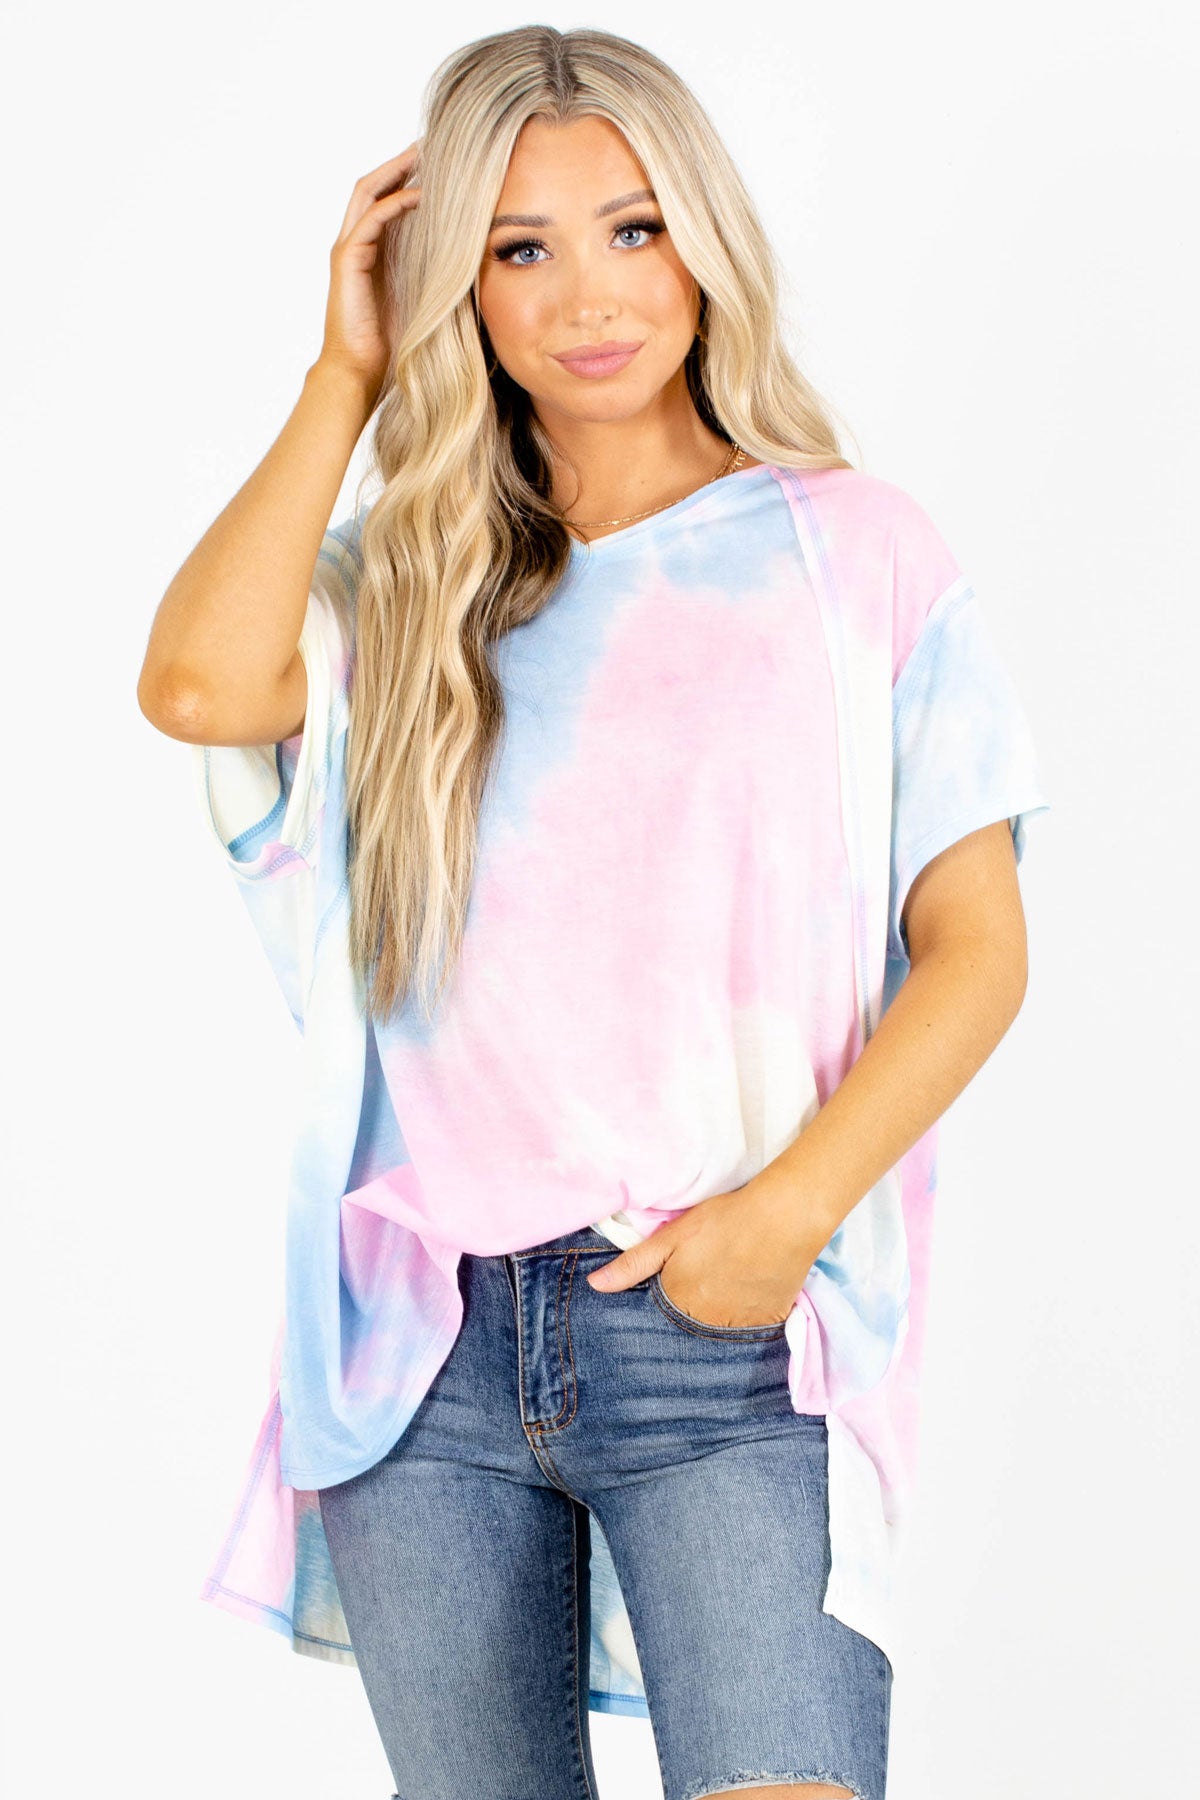 Blue and Pink Tie Dye Top For Women